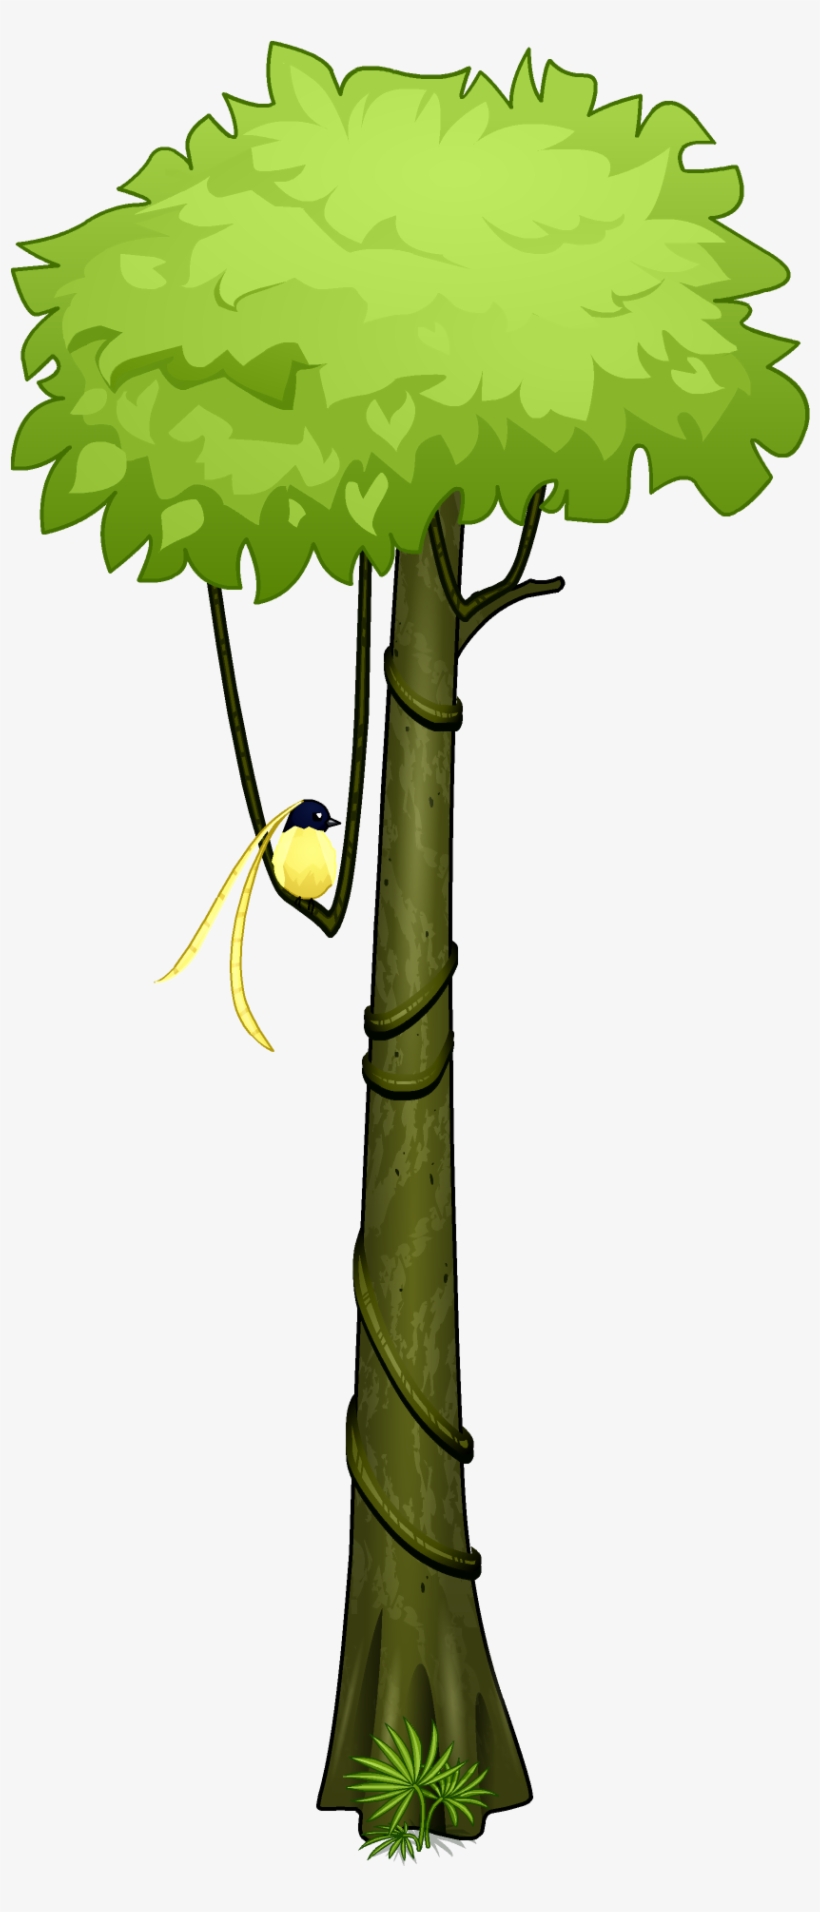 Amazon Rainforest Clipart At Getdrawings - Amazon Rainforest Clipart, transparent png #934590